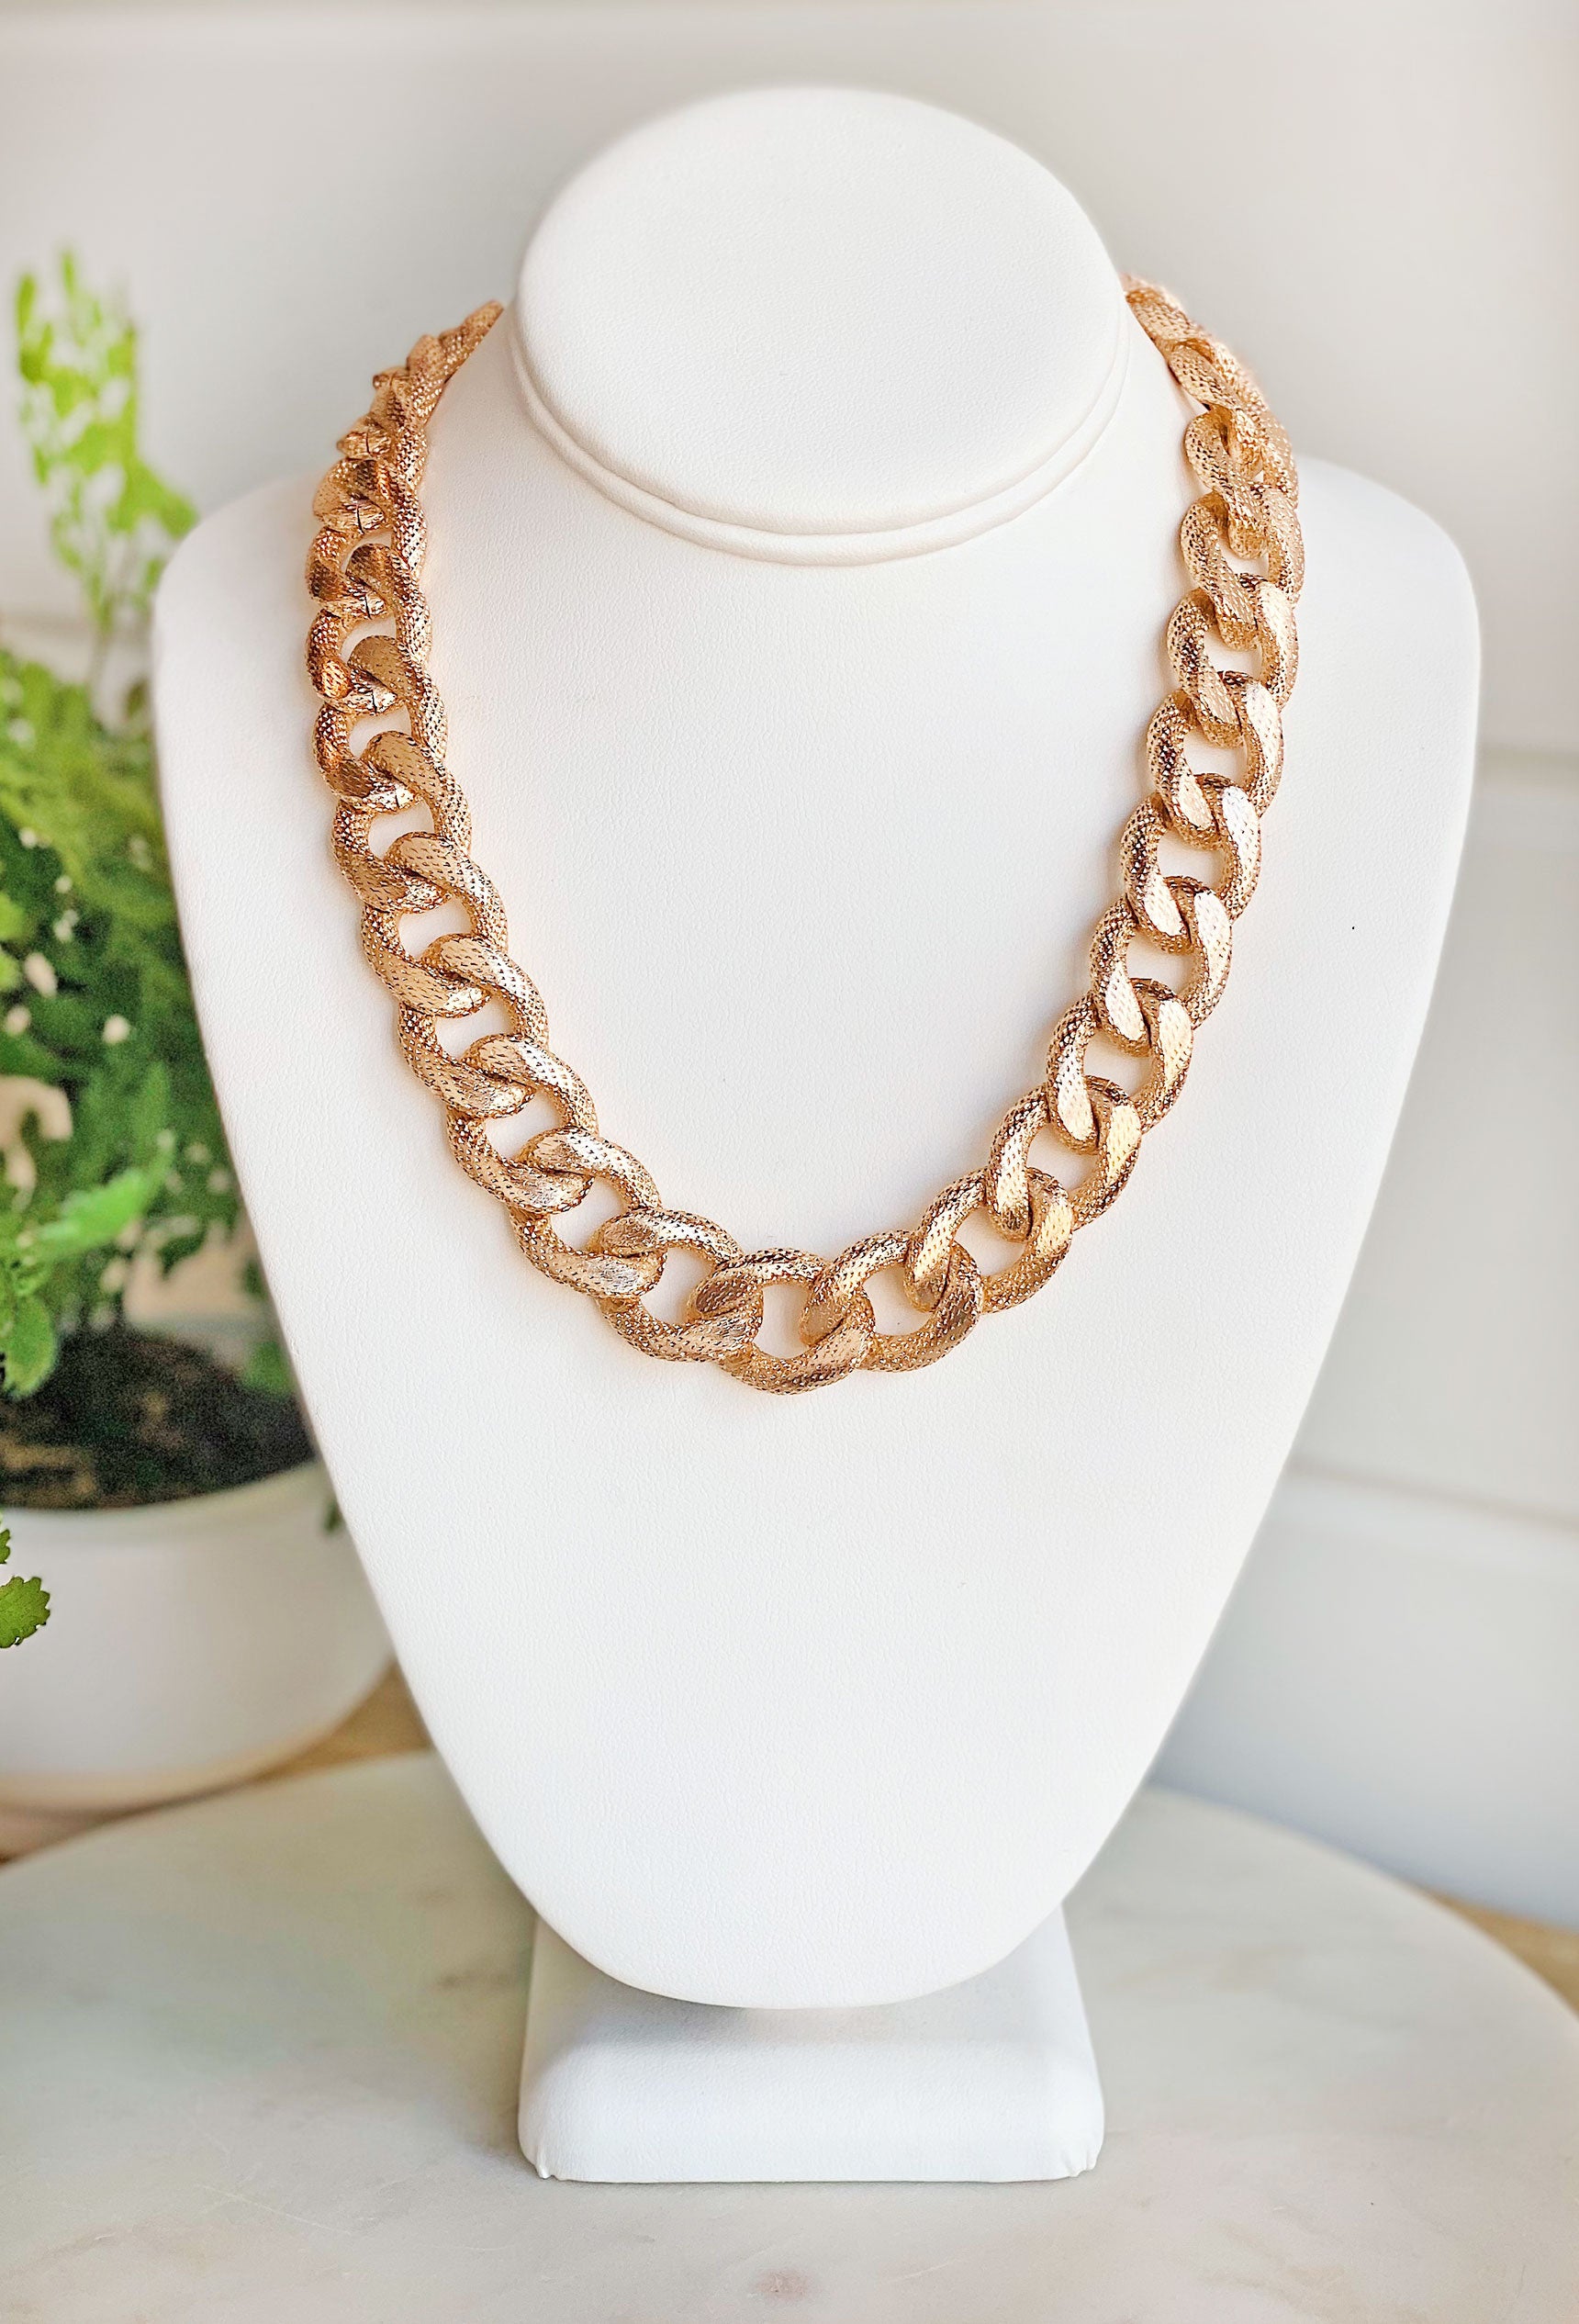 Full Disclosure Chain Necklace, chunky textured gold chainlink necklace